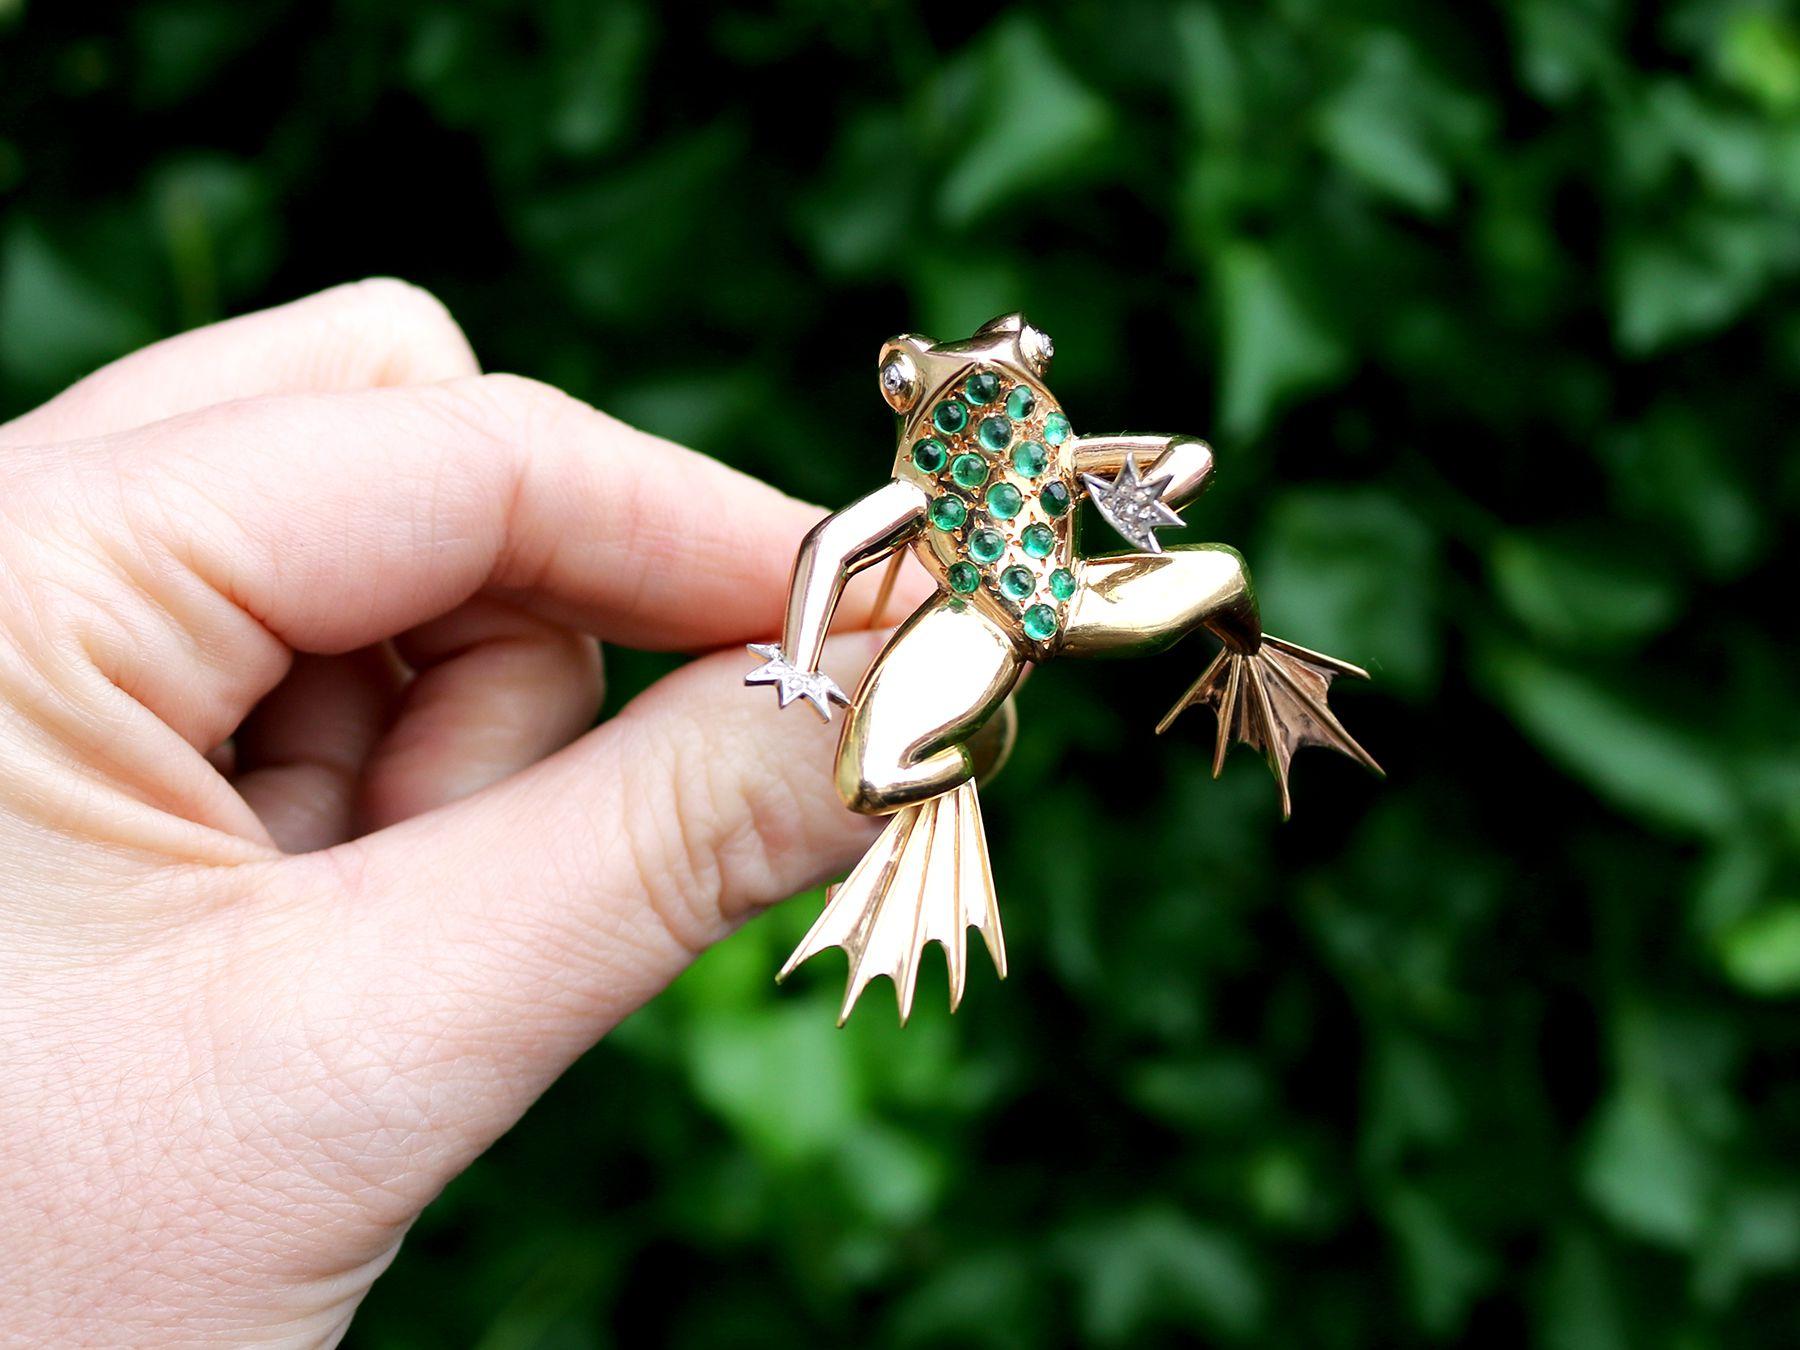 A stunning, fine and impressive vintage French 0.75 carat emerald and 0.11 carat diamond, 18 karat yellow gold and platinum set 'frog' brooch; part of our diverse vintage jewellery and estate jewelry collections

This stunning, fine and impressive